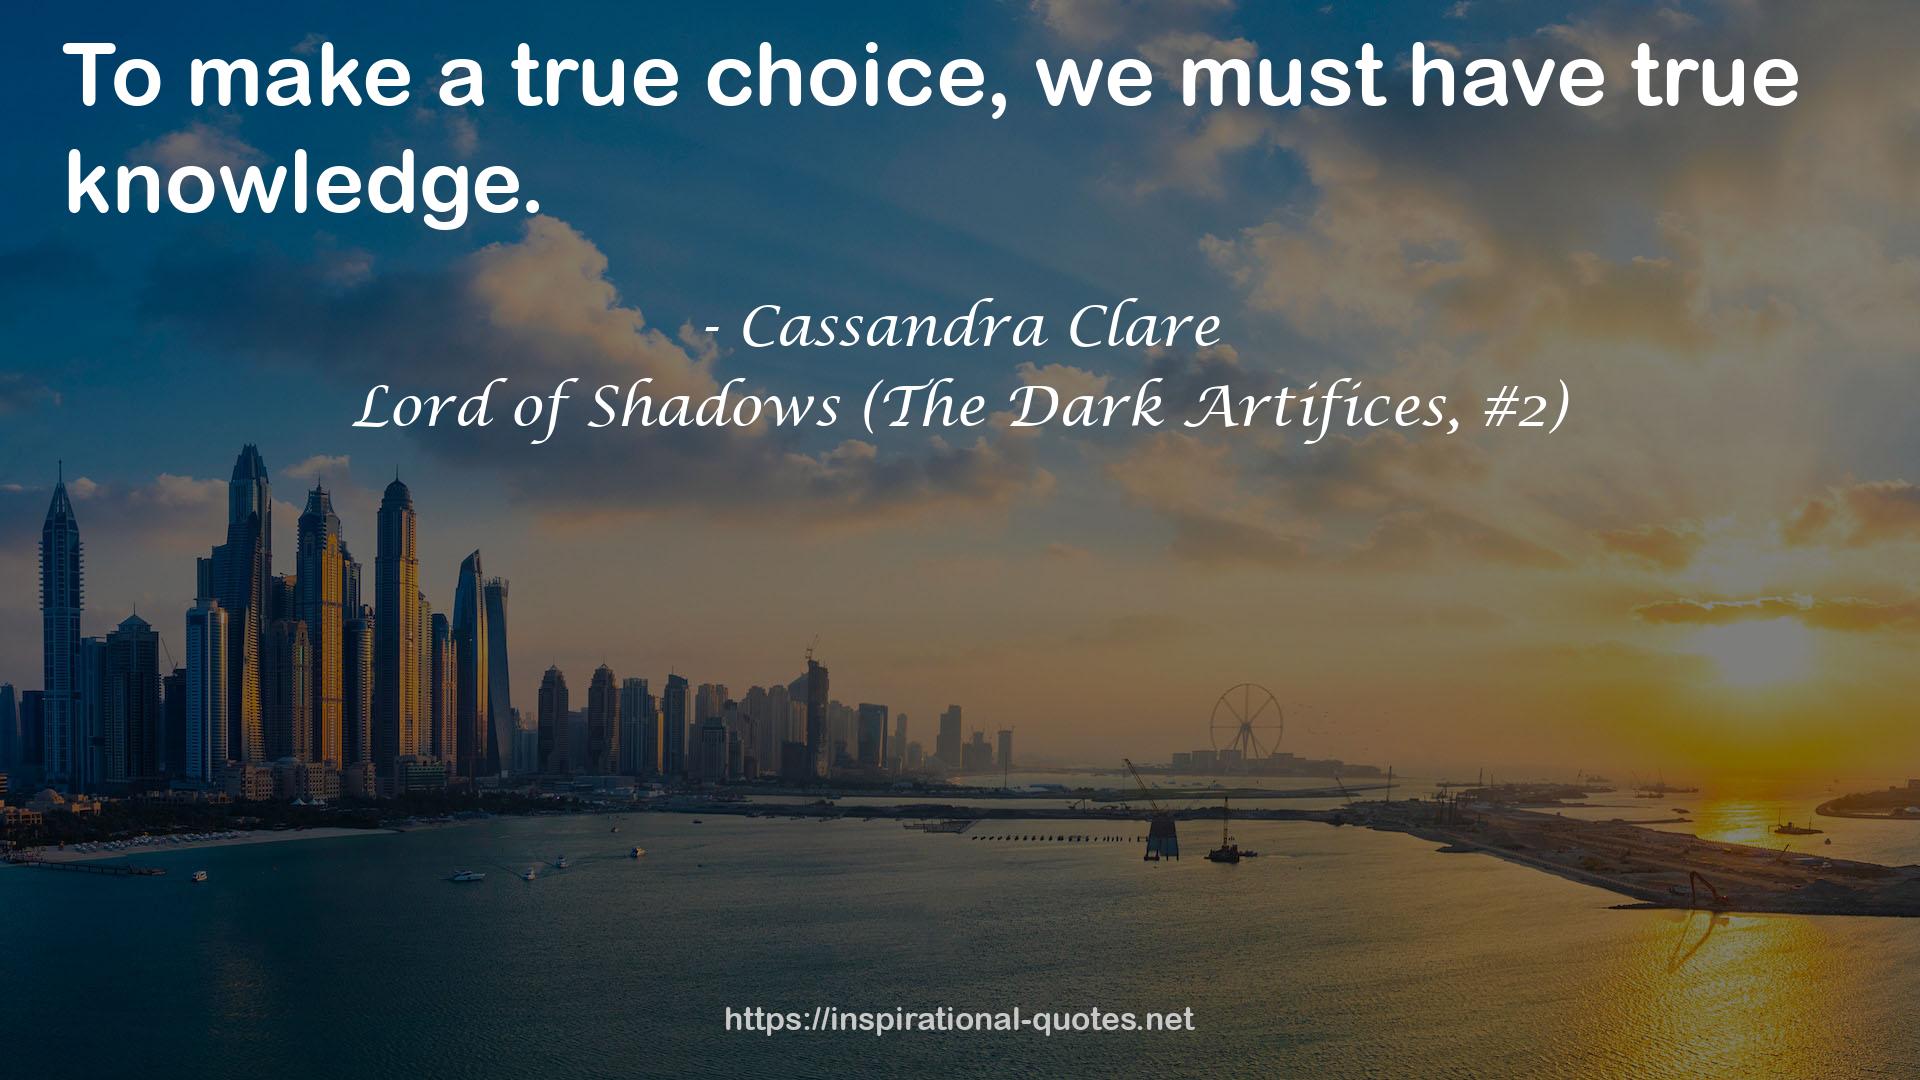 Lord of Shadows (The Dark Artifices, #2) QUOTES